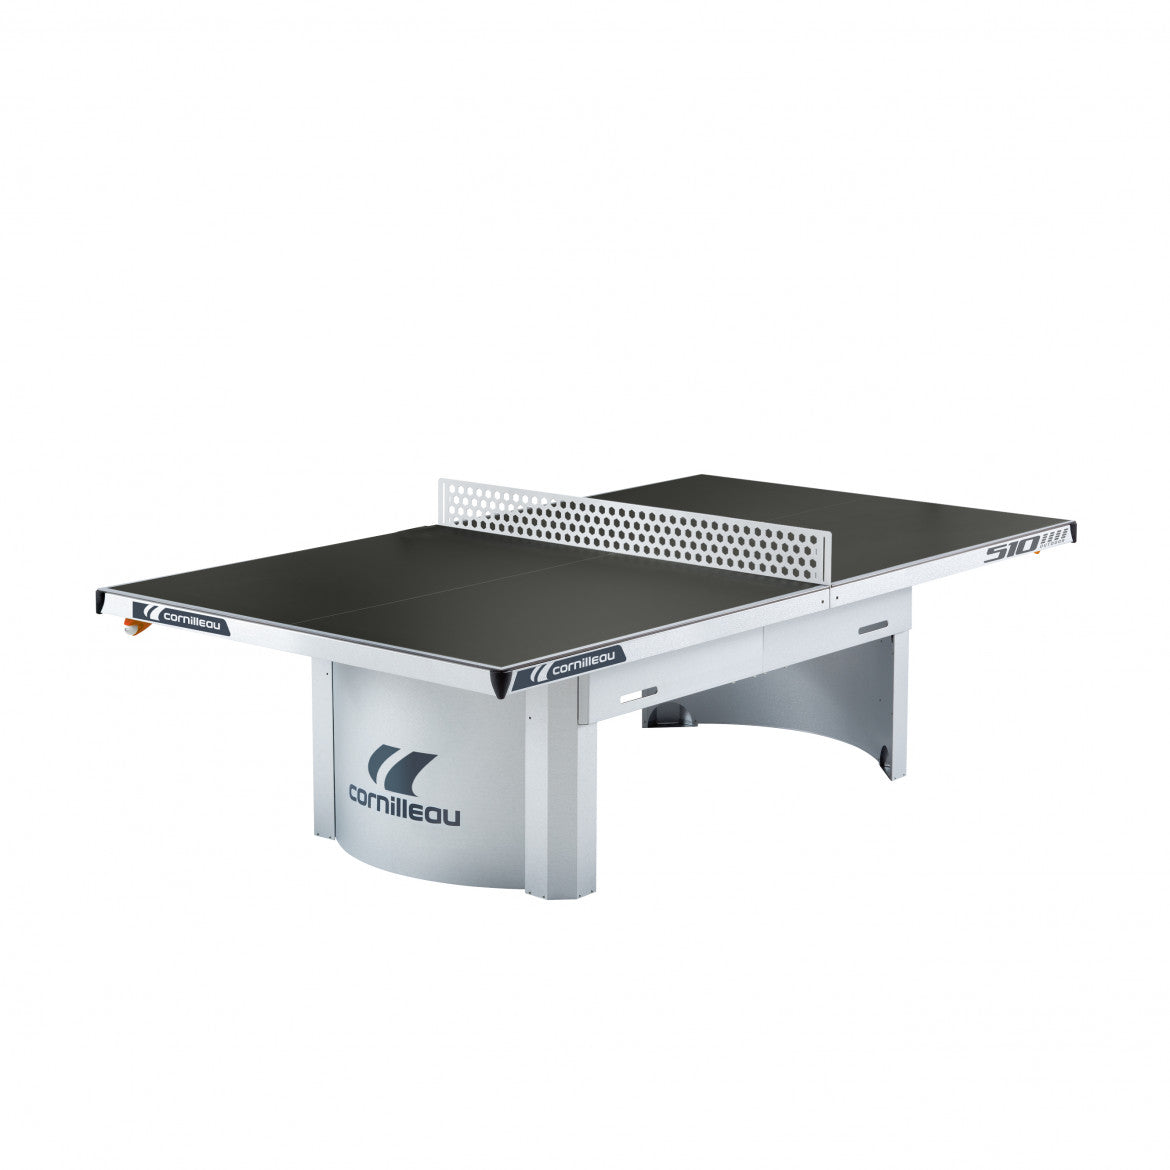 Cornilleau Pro 510M Grey Static Outdoor Table Tennis Table